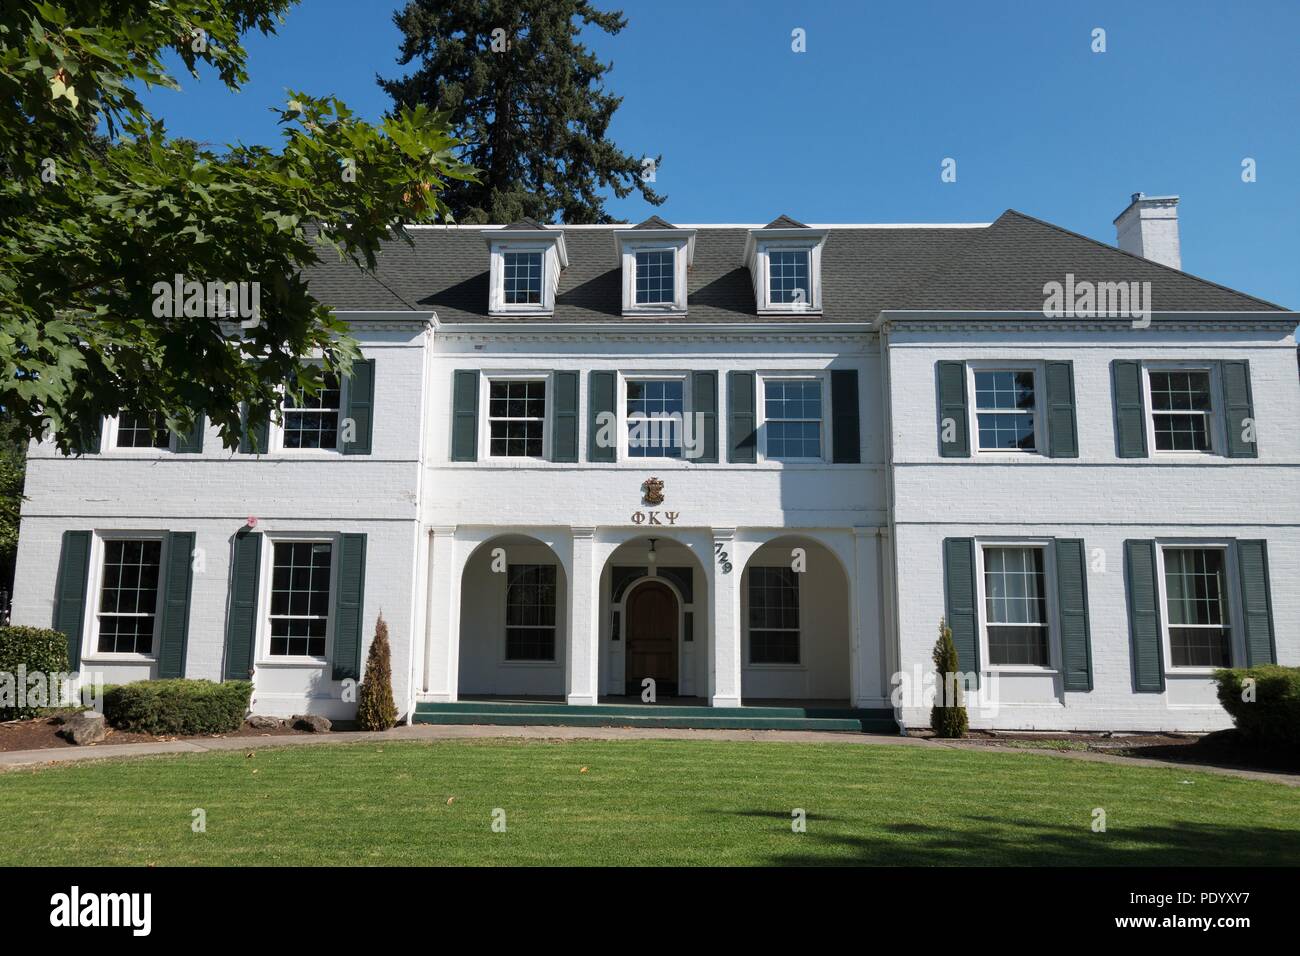 Omega house today, on the 40th anniversary of the release of the movie 'Animal House', in Eugene, Oregon, USA. Stock Photo